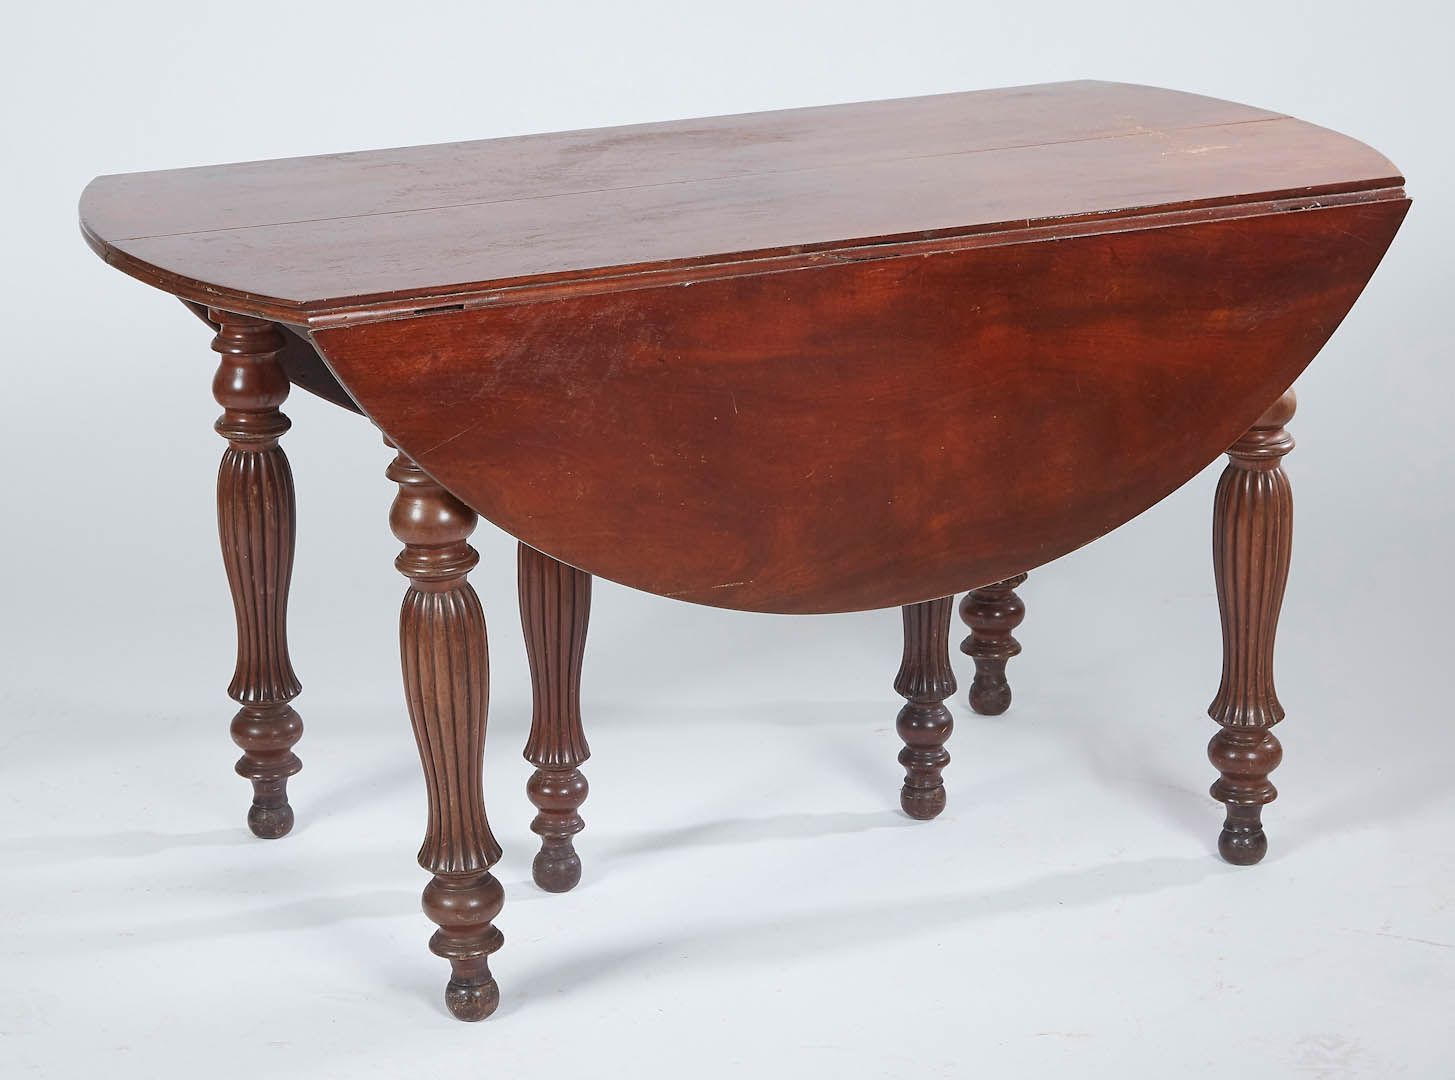 Null Round mahogany table with flaps resting on six legs called "umbrella". Loui&hellip;